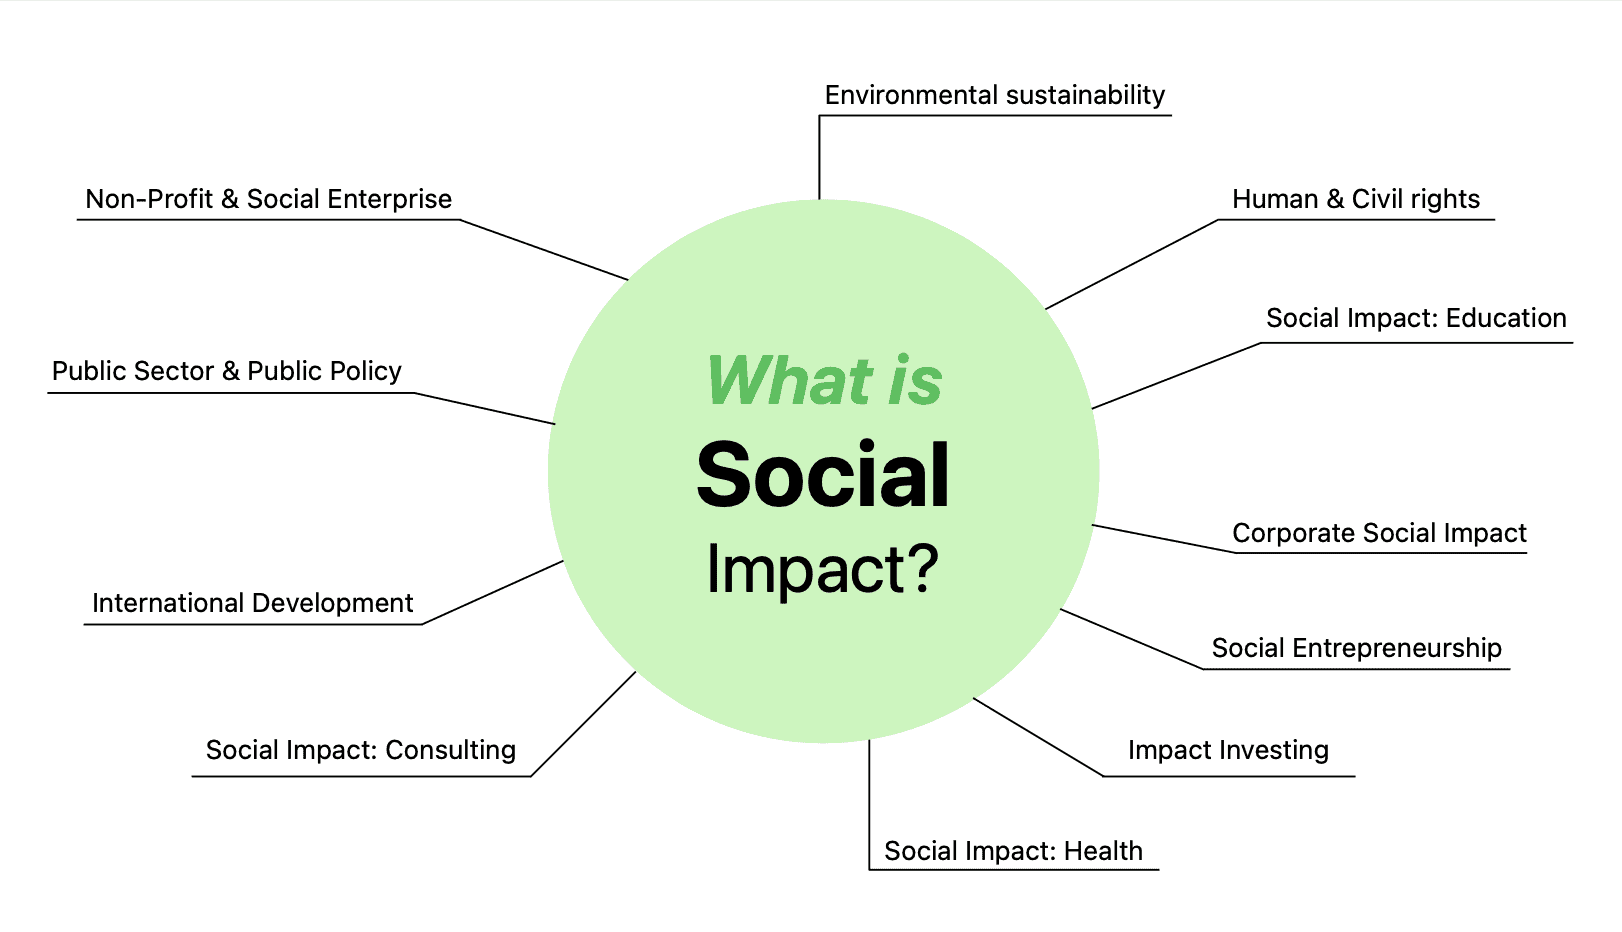 What is Social Impact?